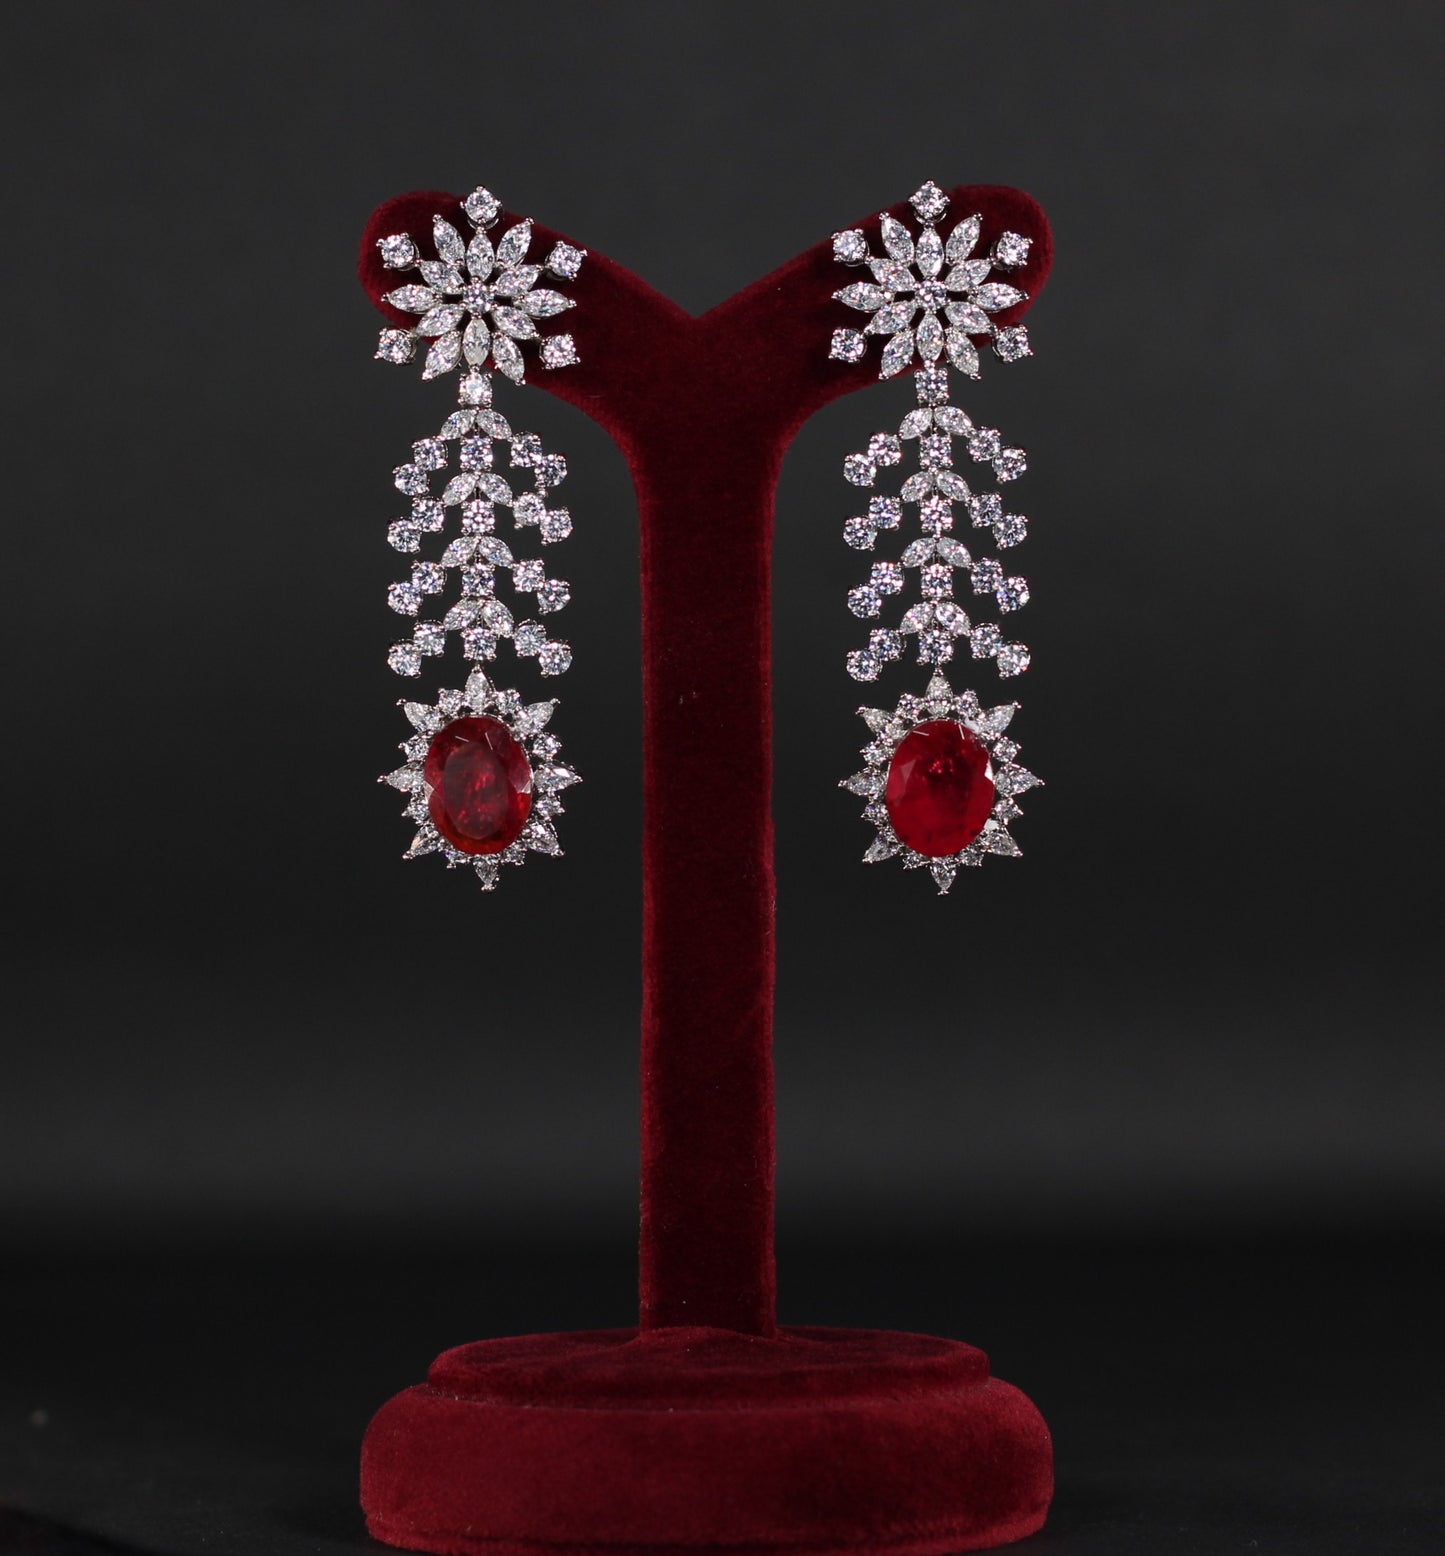 EARRINGS IN 92.5 STERLING SILVER WITH SWAROVSKI stones , PINK ONYX AND WHITE RHODIUM PLATED